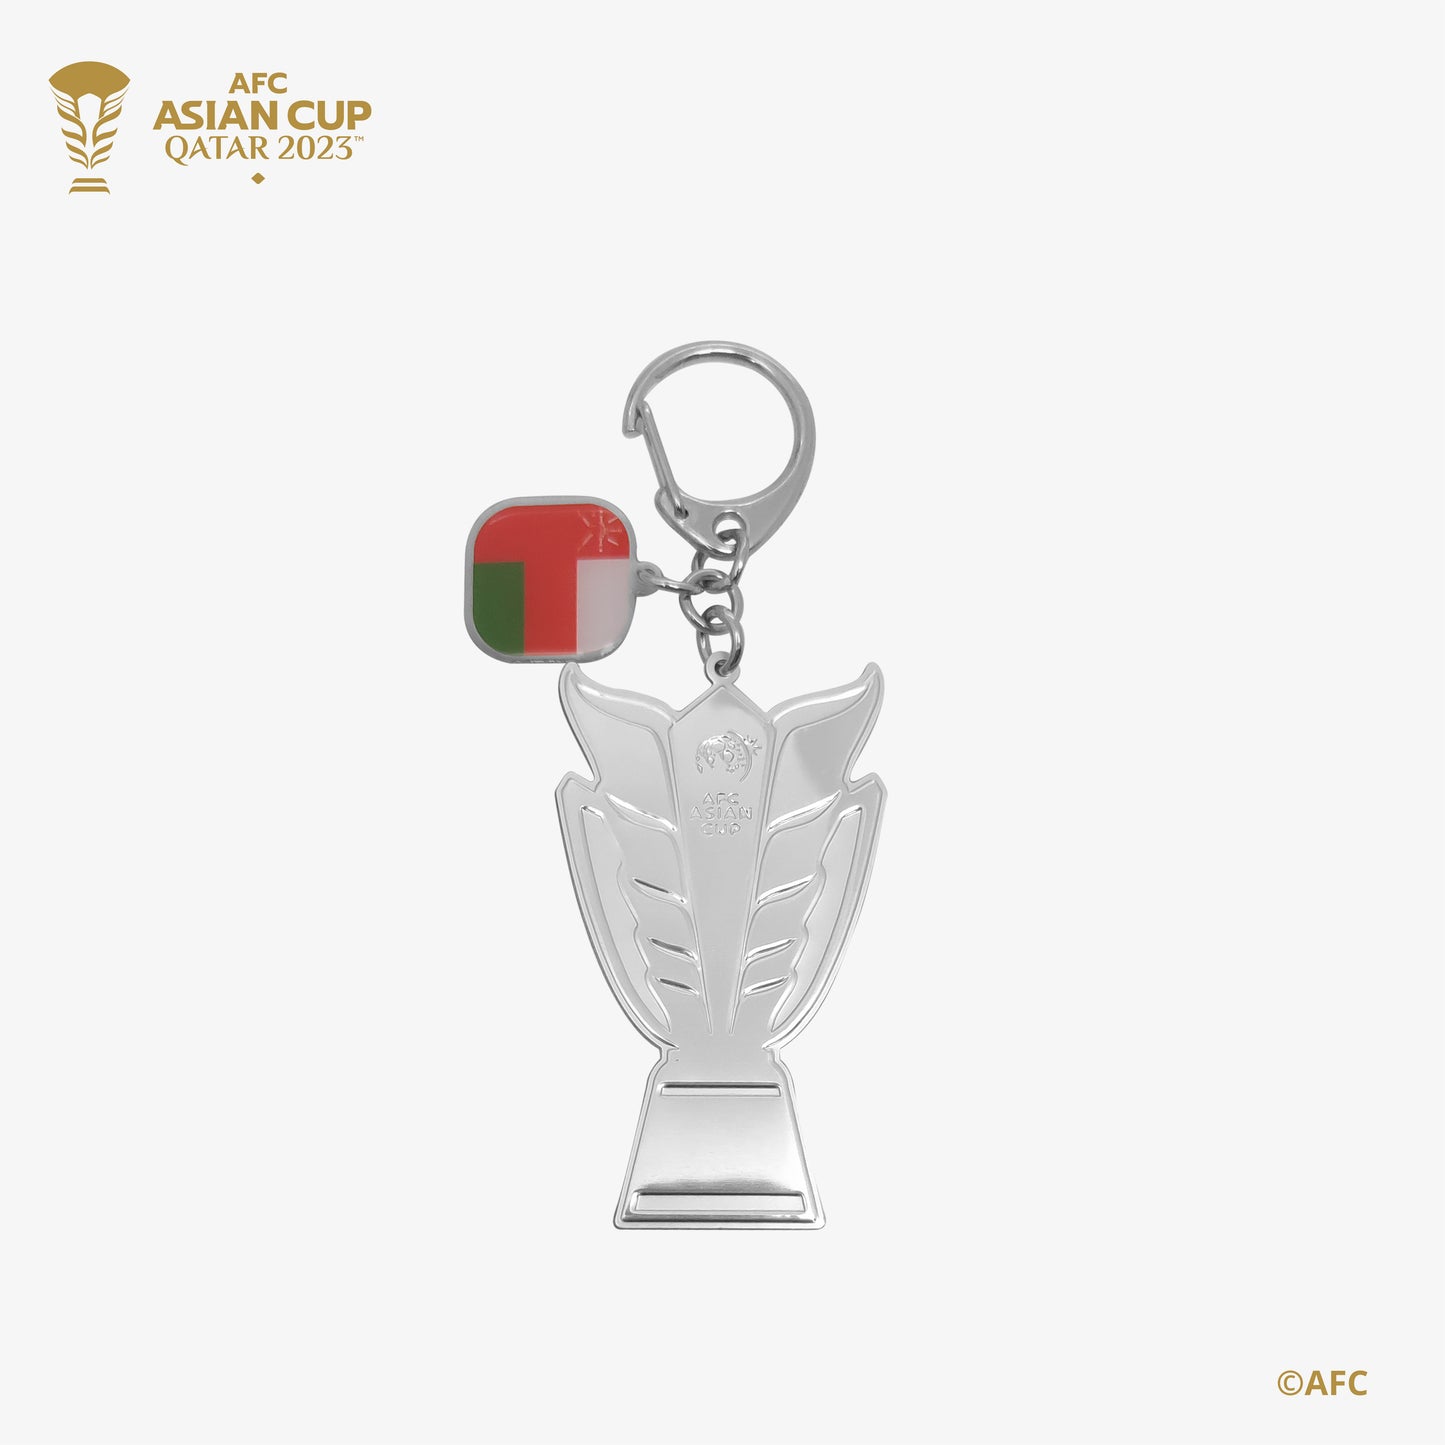 AFC Asian Cup 2D Trophy Keychain with Country Flag - Oman